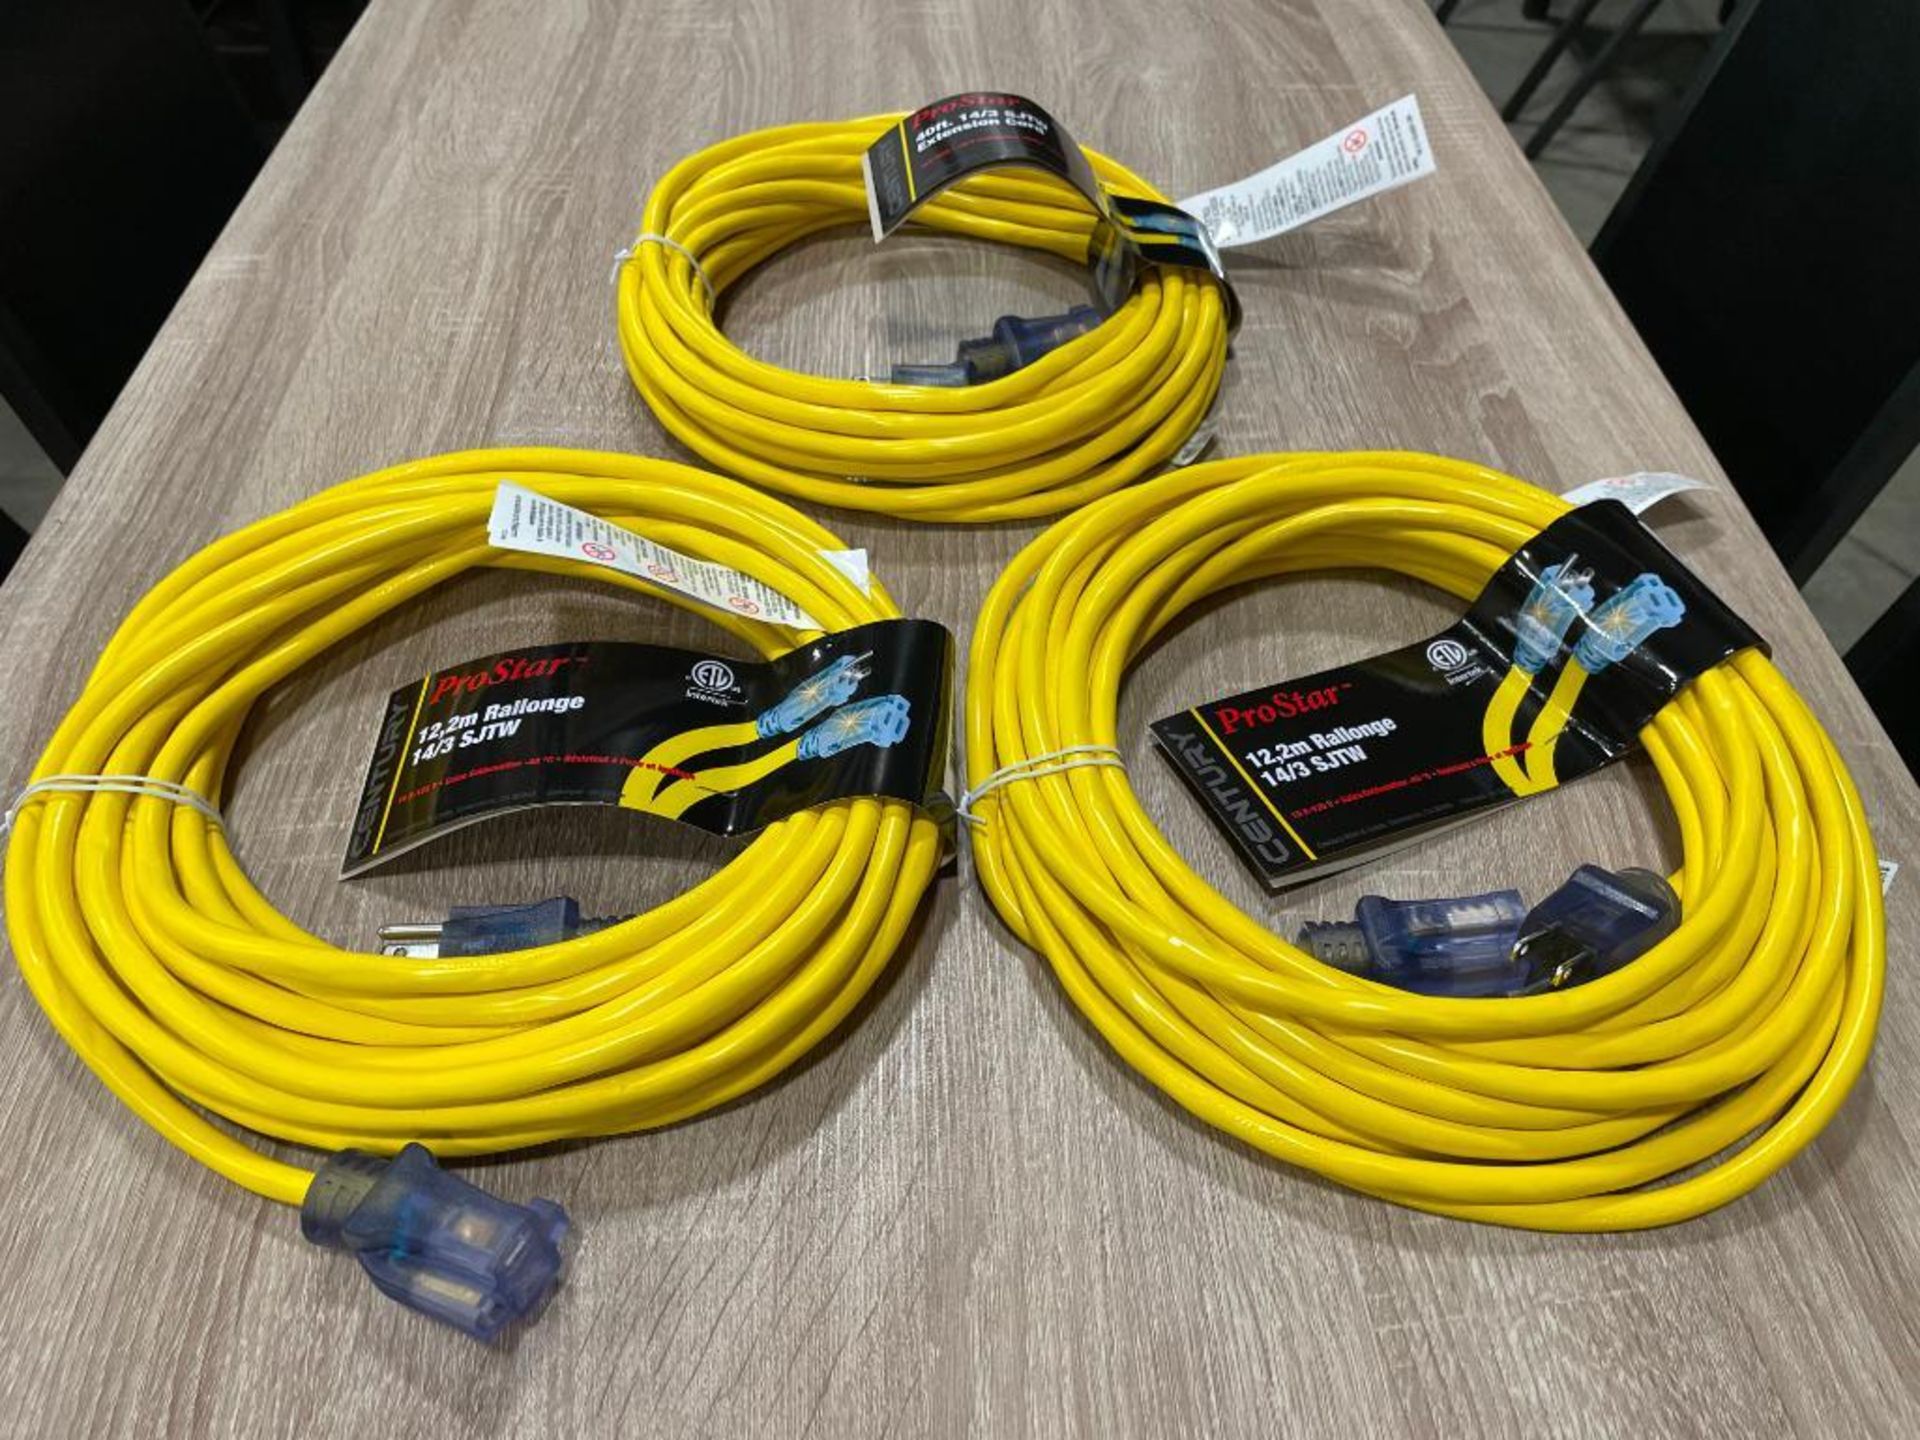 CENTURY, PRO STAR - 40' 14/3 SJTW EXTENSION CORD YELLOW - NEW - LOT OF 3